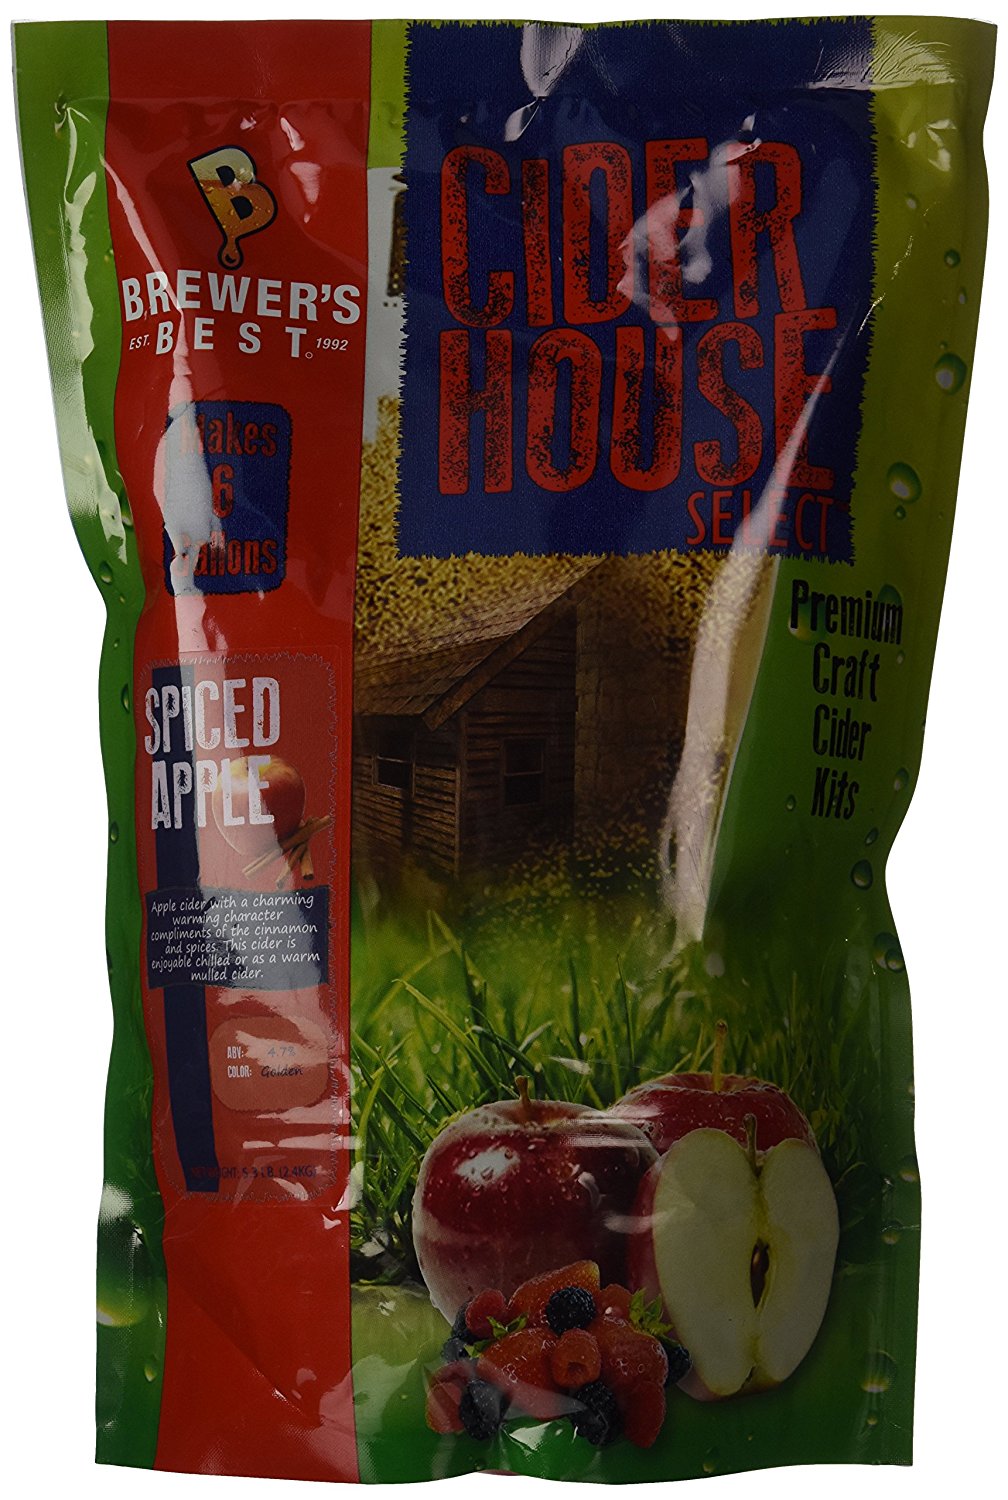 Home Brew Ohio 1176 Brewer's Best Cider House Select Spiced Apple Cider Kit